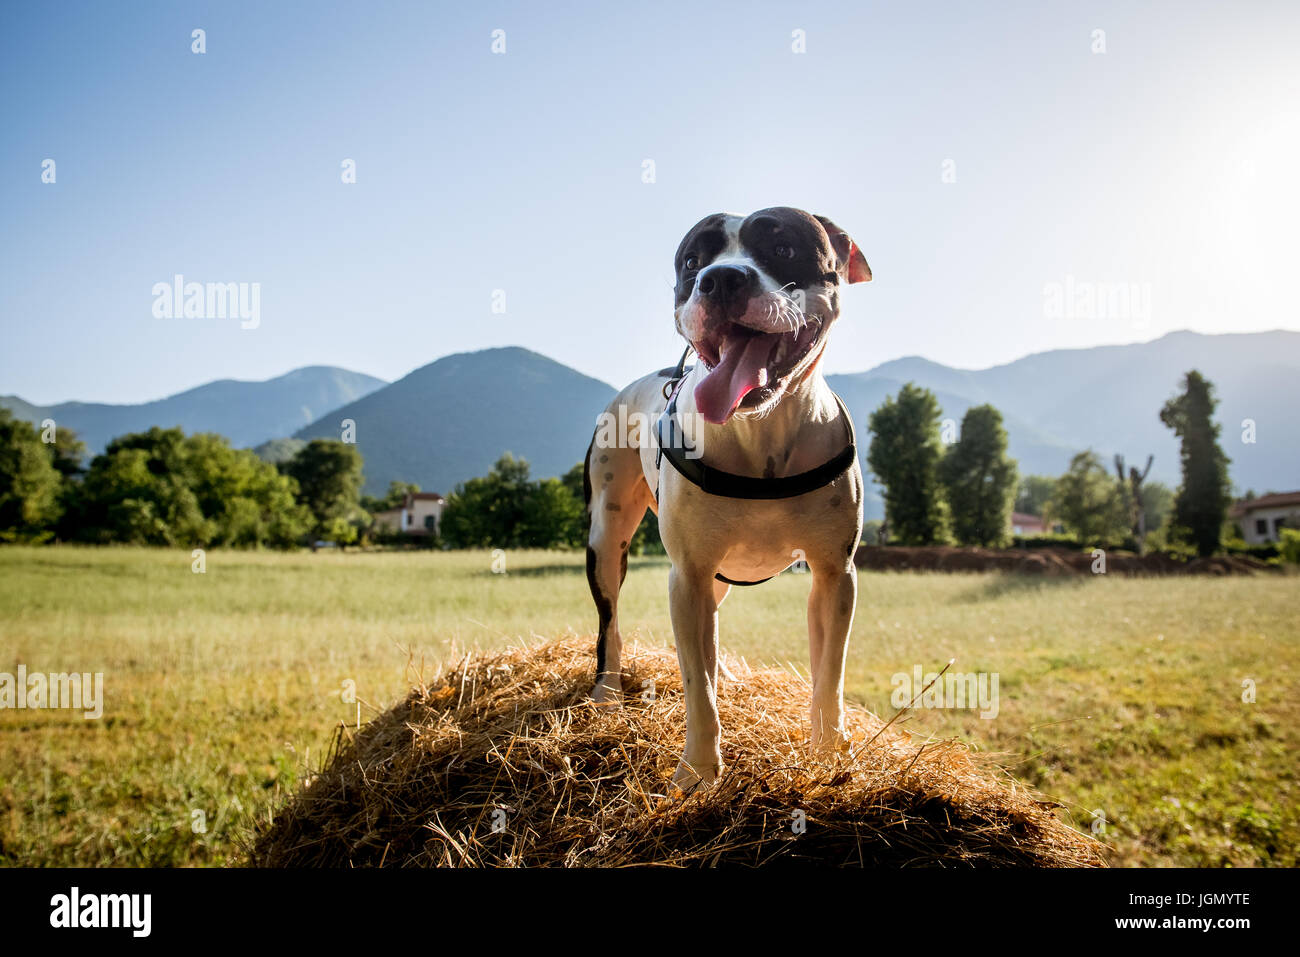 American staffordshire bull terrier domestic dog standing on straw haycock, countryside green field background, summer sunset Stock Photo